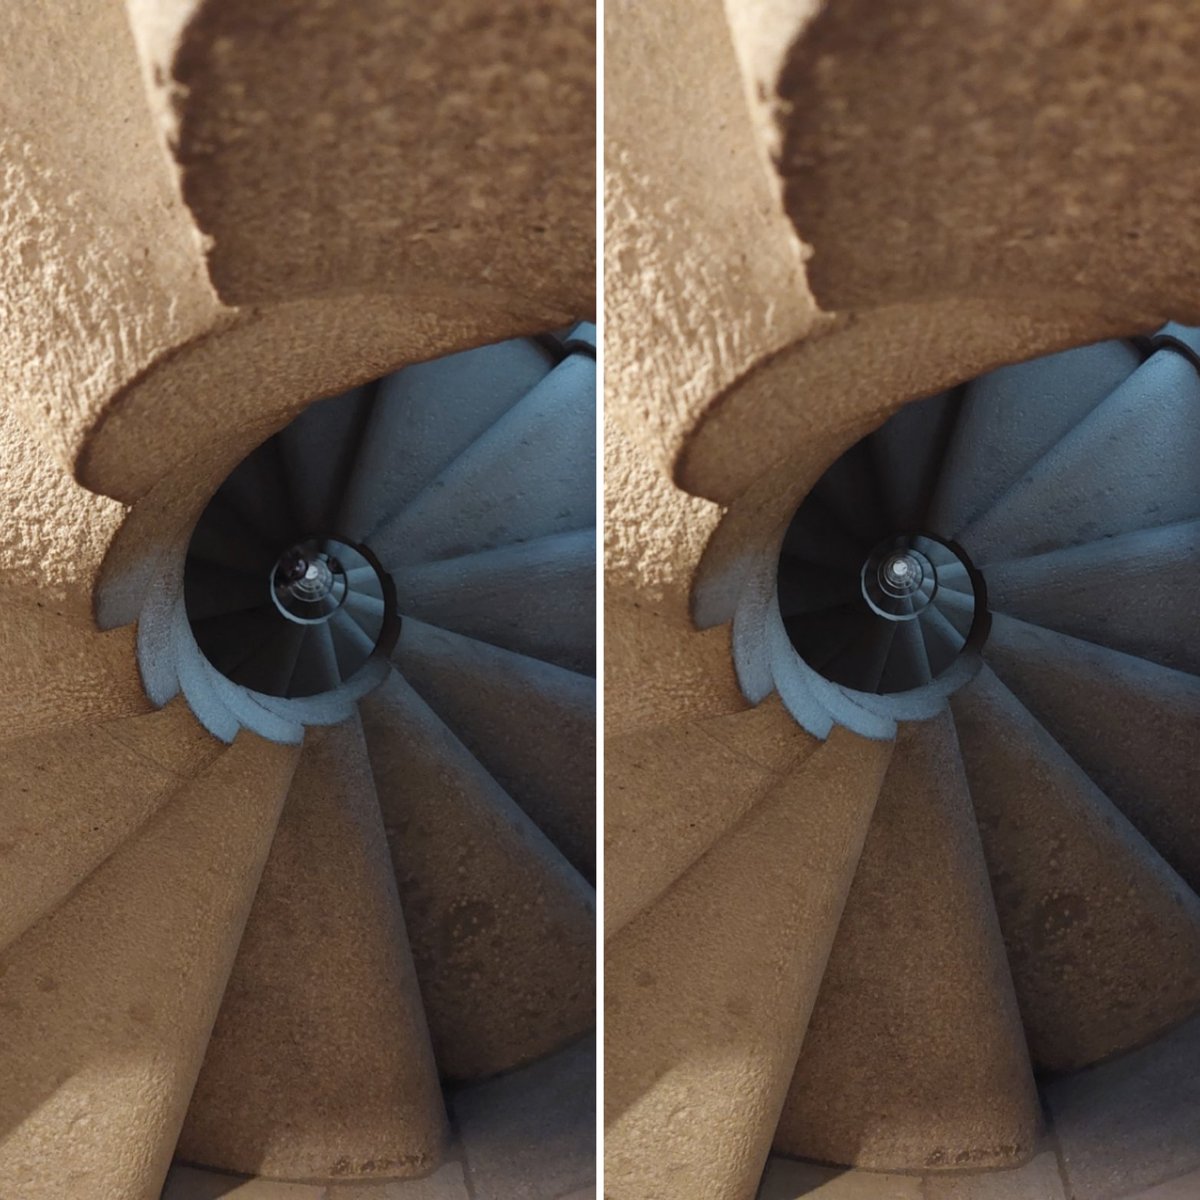 Looking up... in #3D! 
#stereoscopic #freeview #LaSagradaFamilia